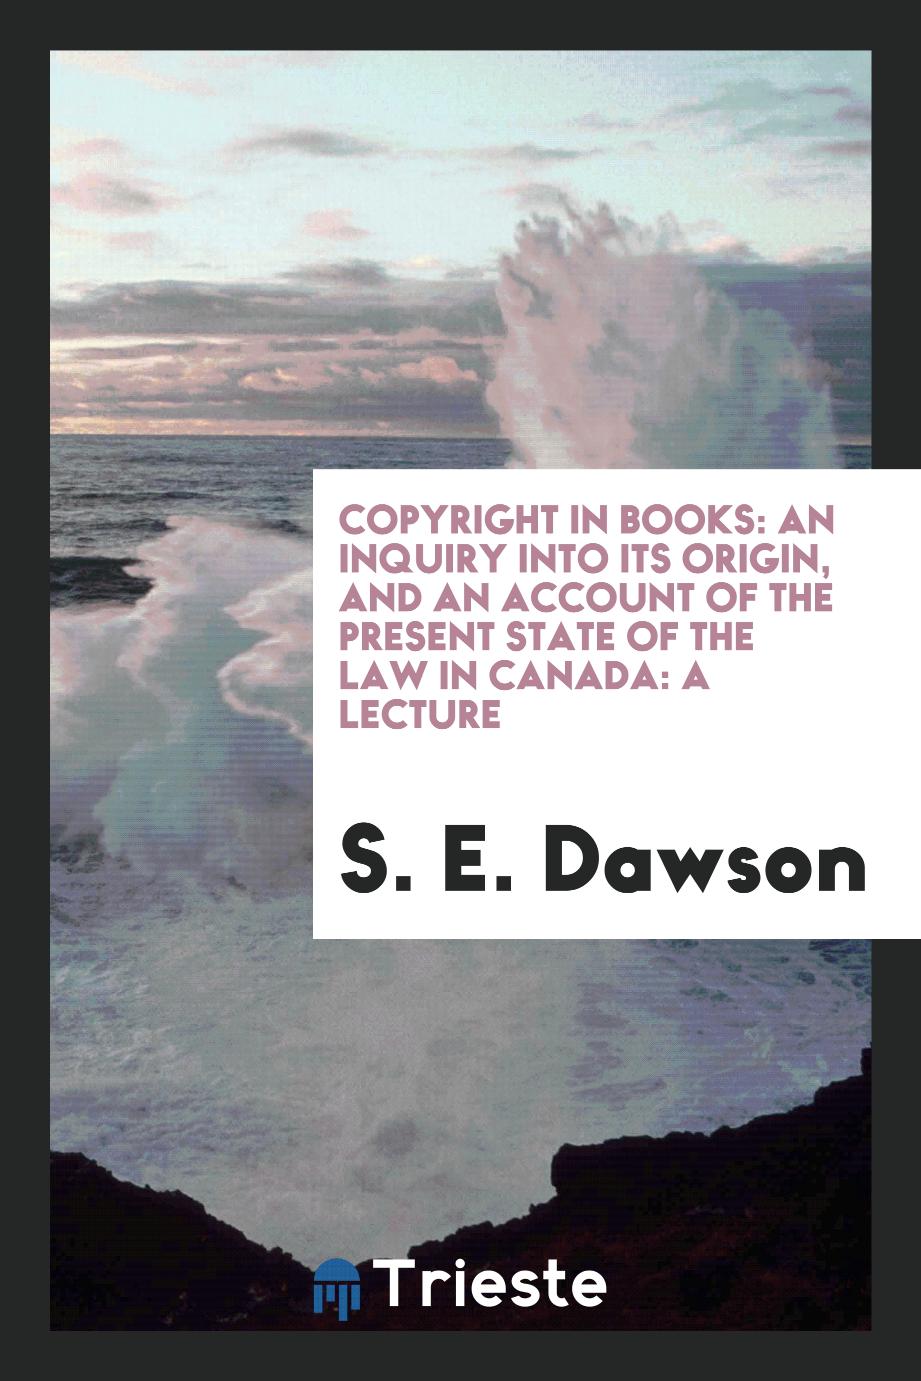 Copyright in books: an inquiry into its origin, and an account of the present state of the law in Canada: a lecture